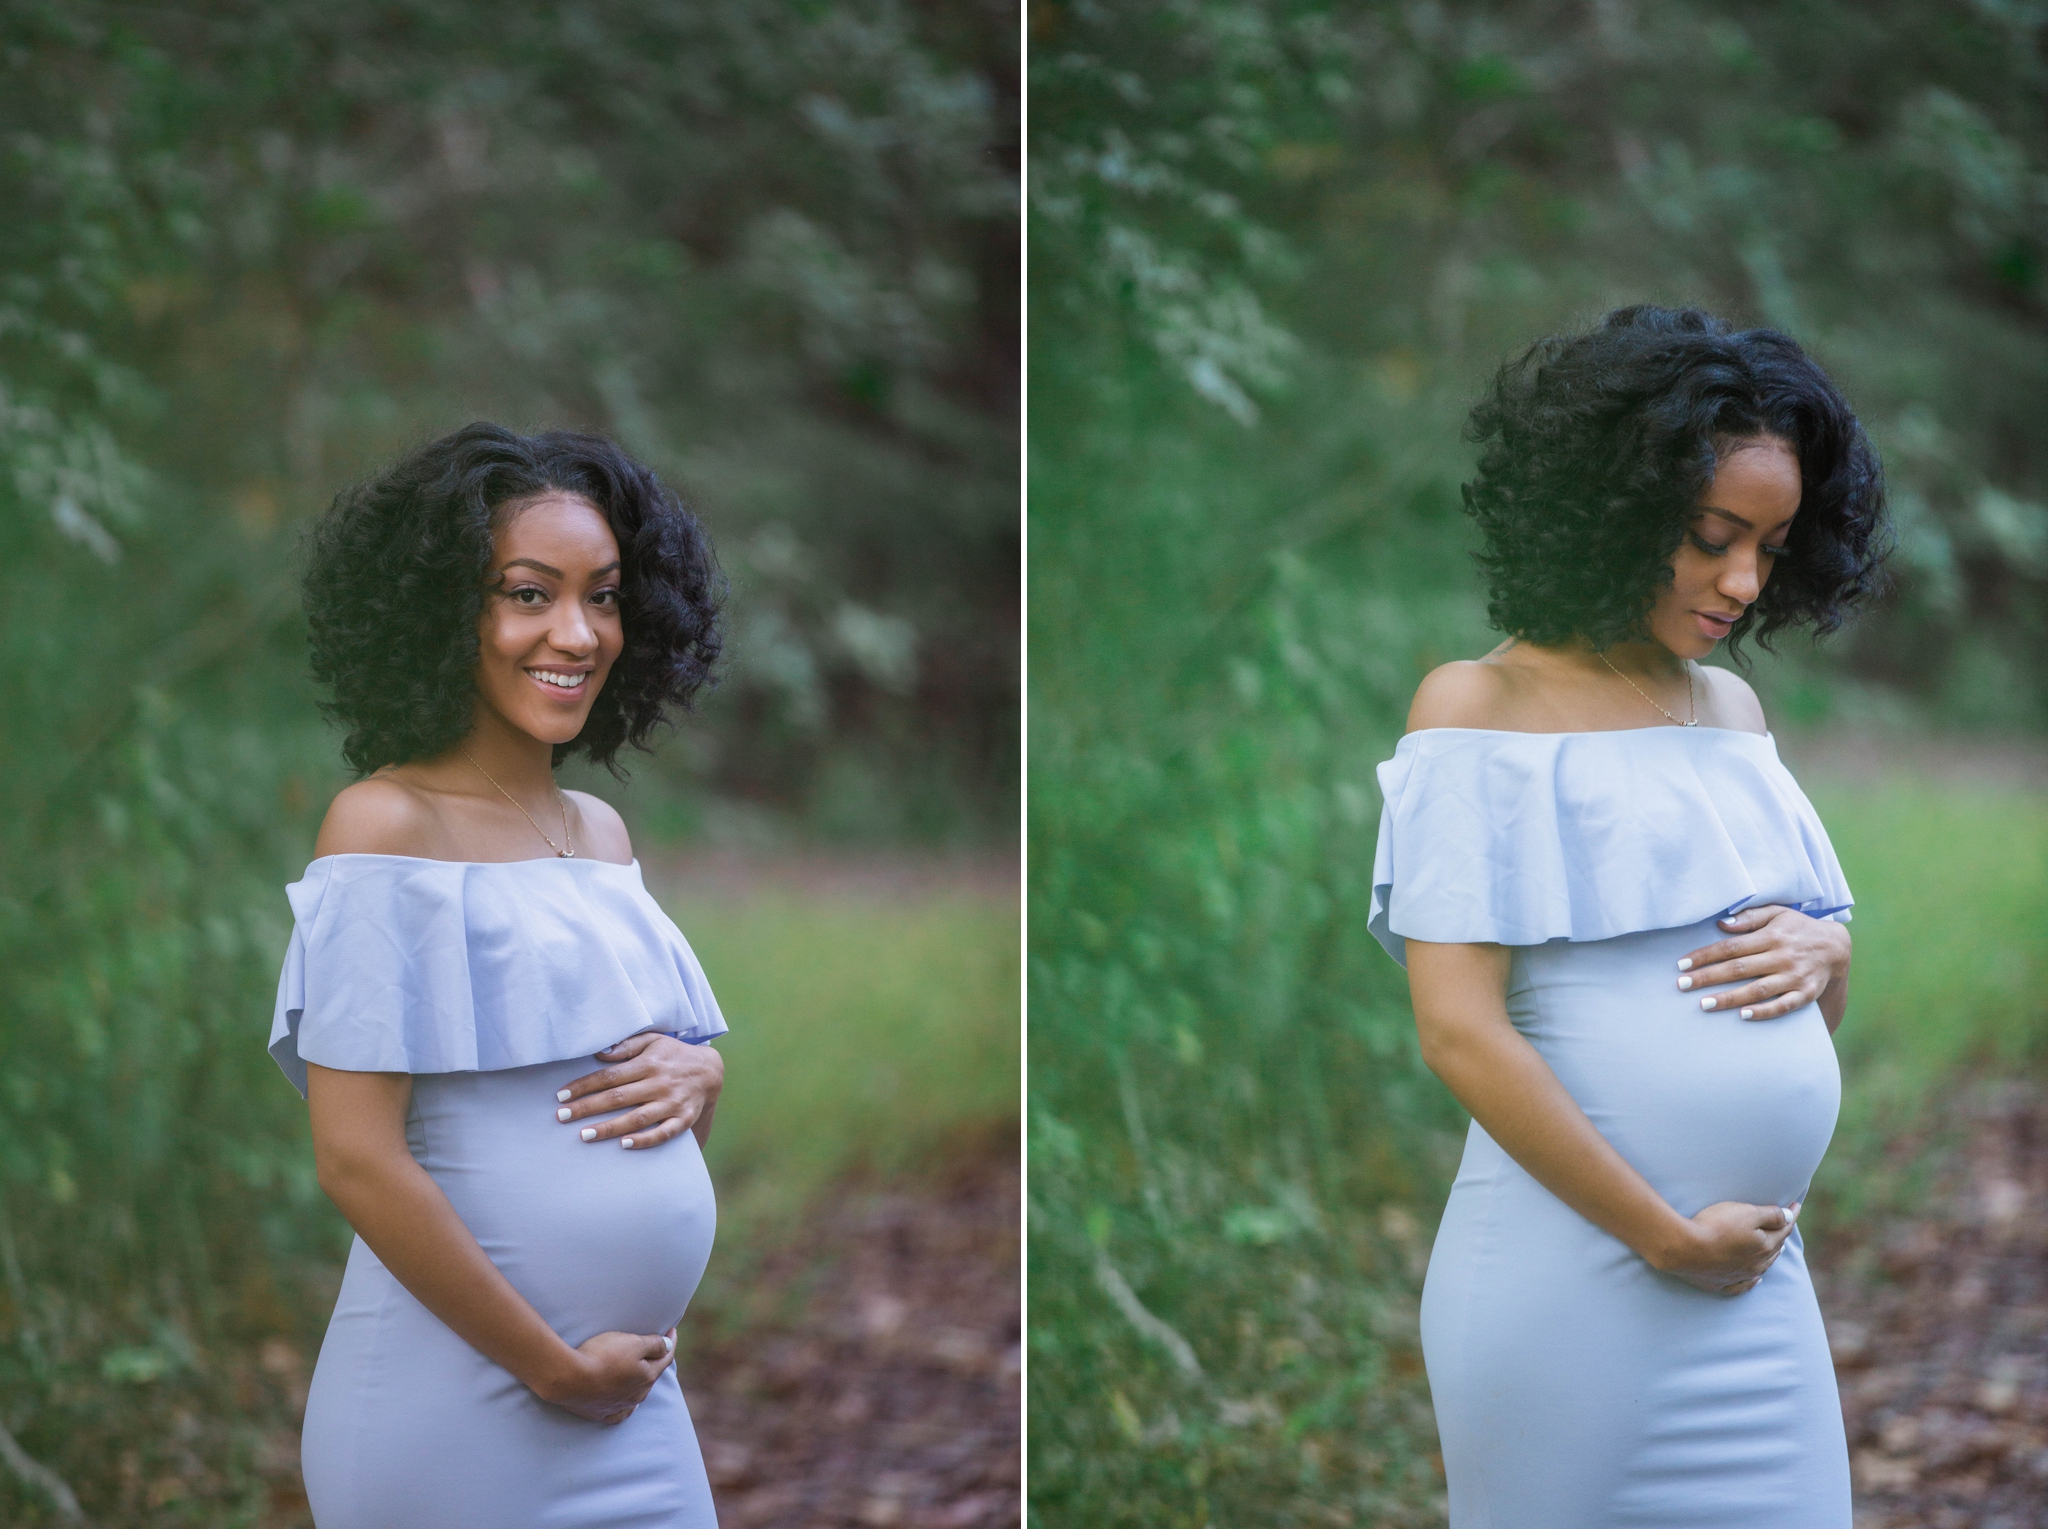 Maternity Photography Session at Clark Park in Fayetteville North Carolina